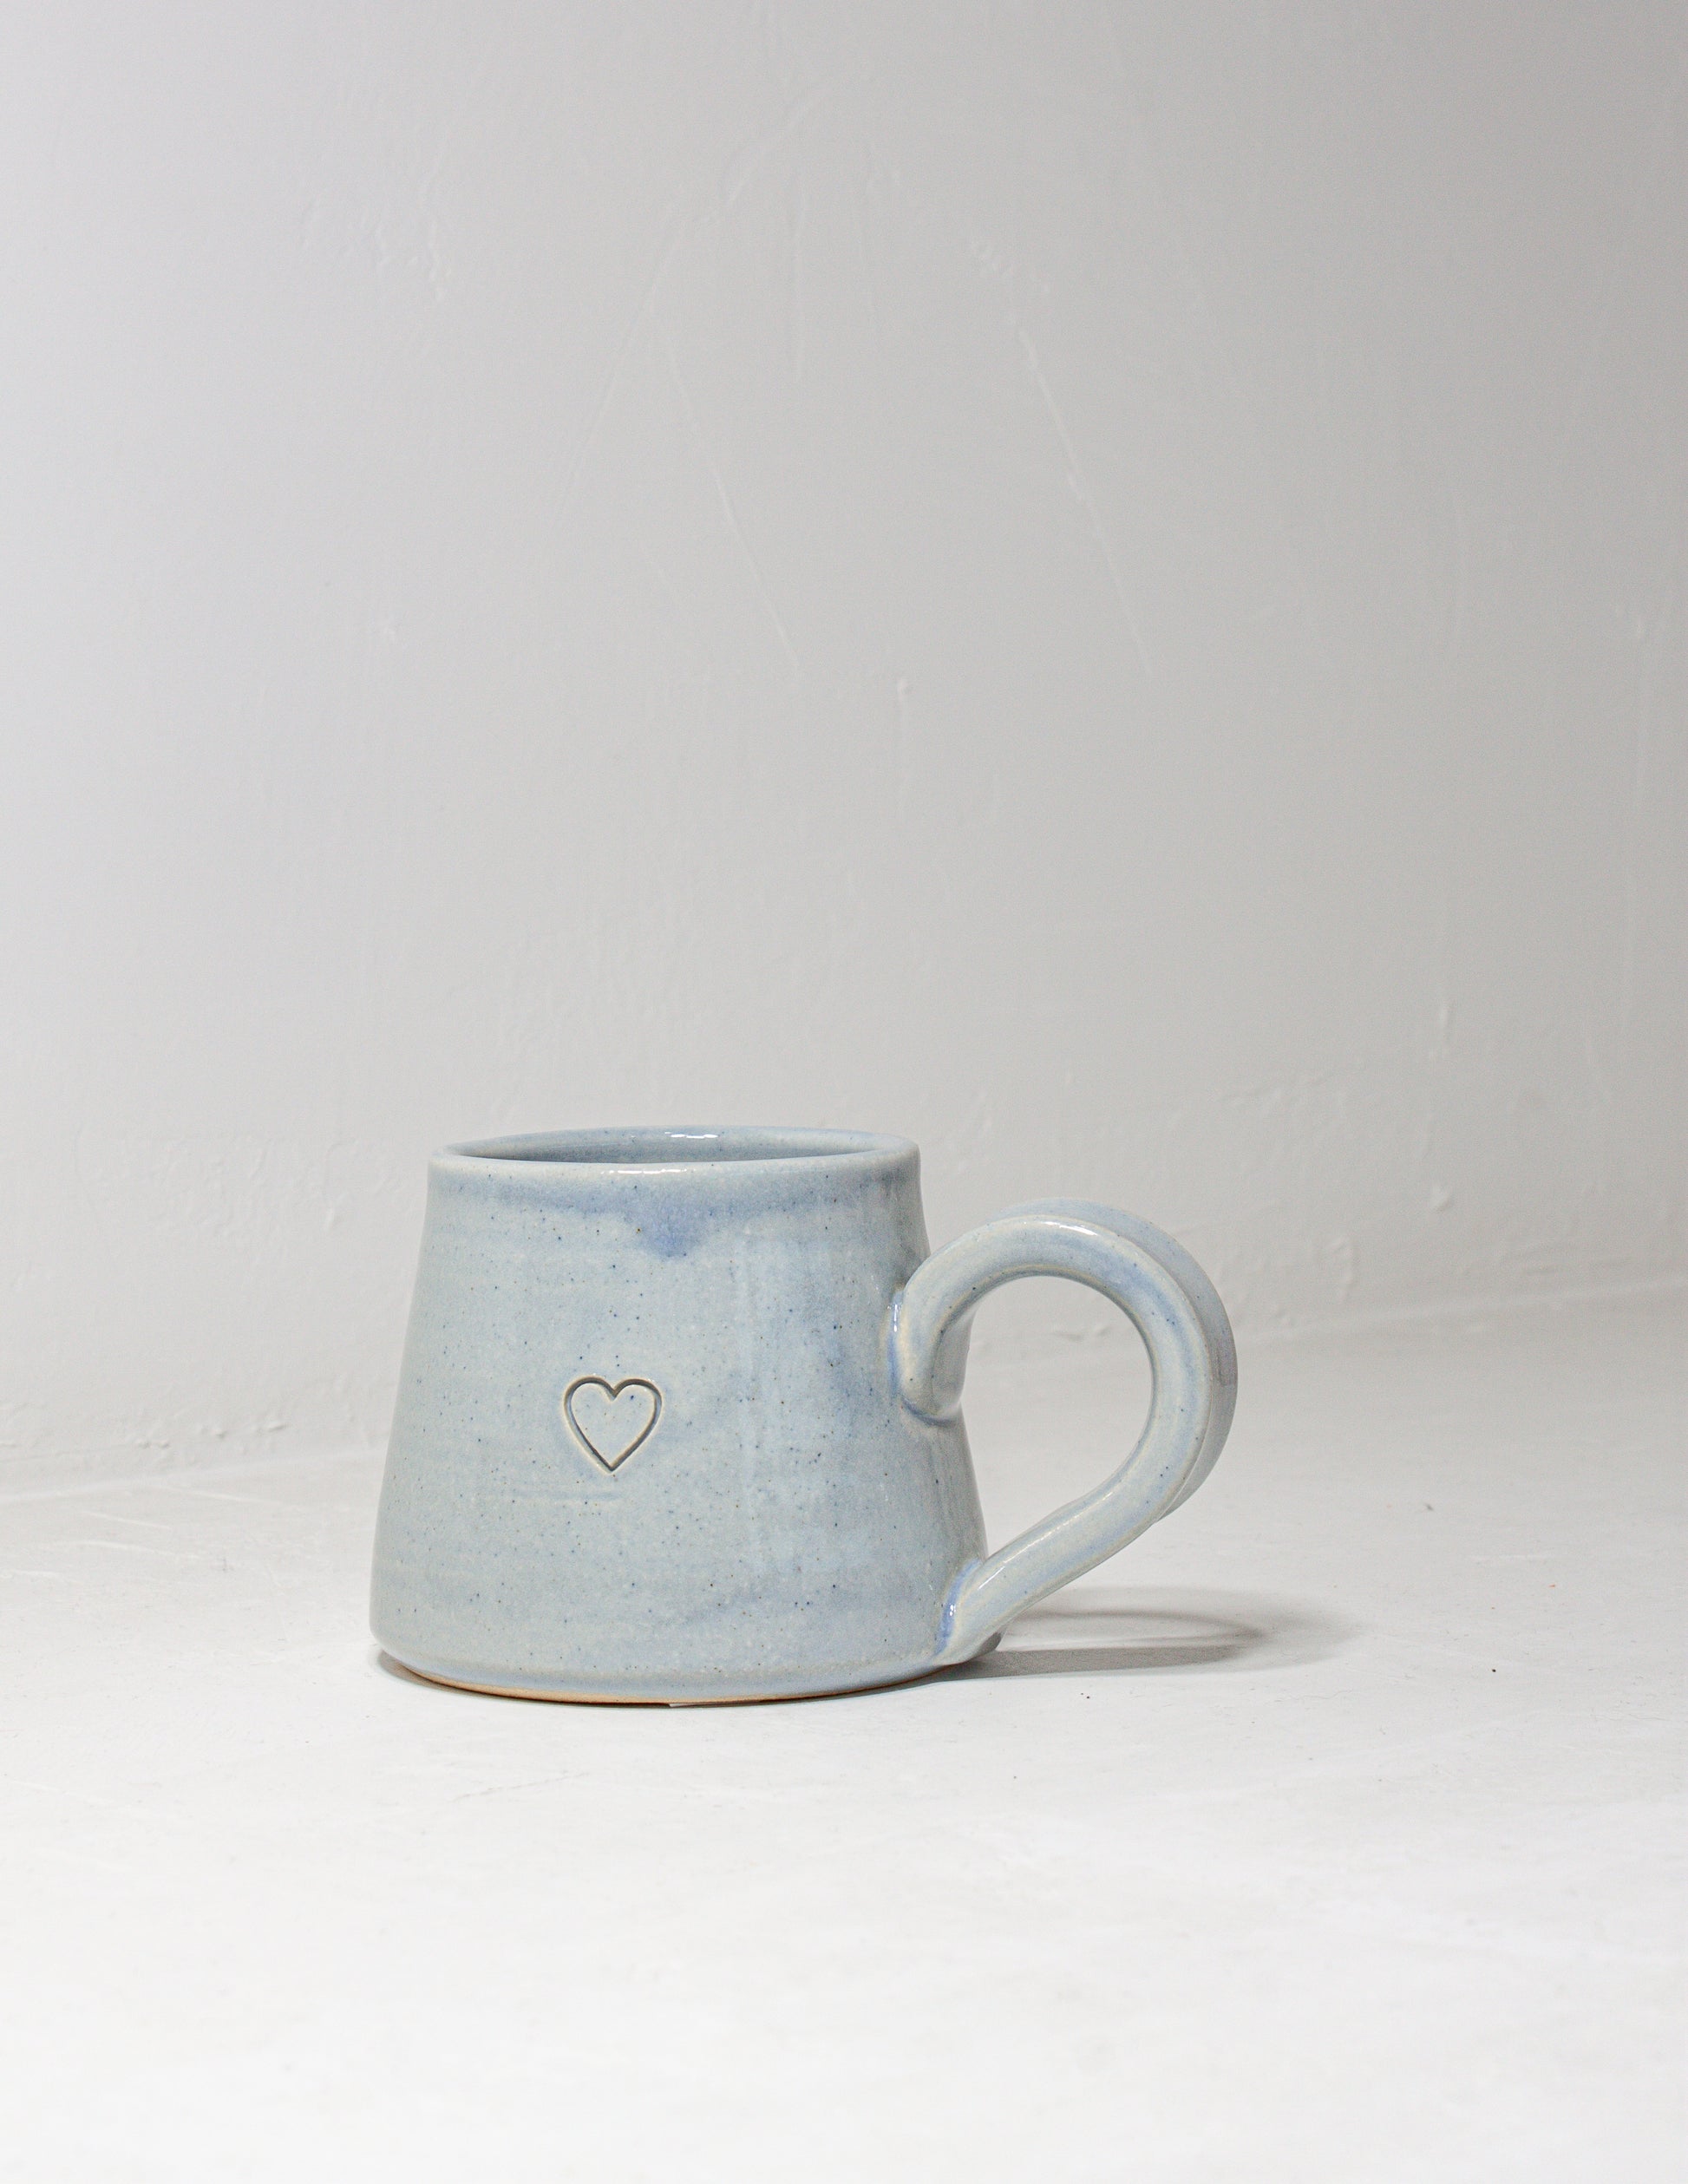 Handmade mug featuring an indented heart that is perfect for Valentine's day